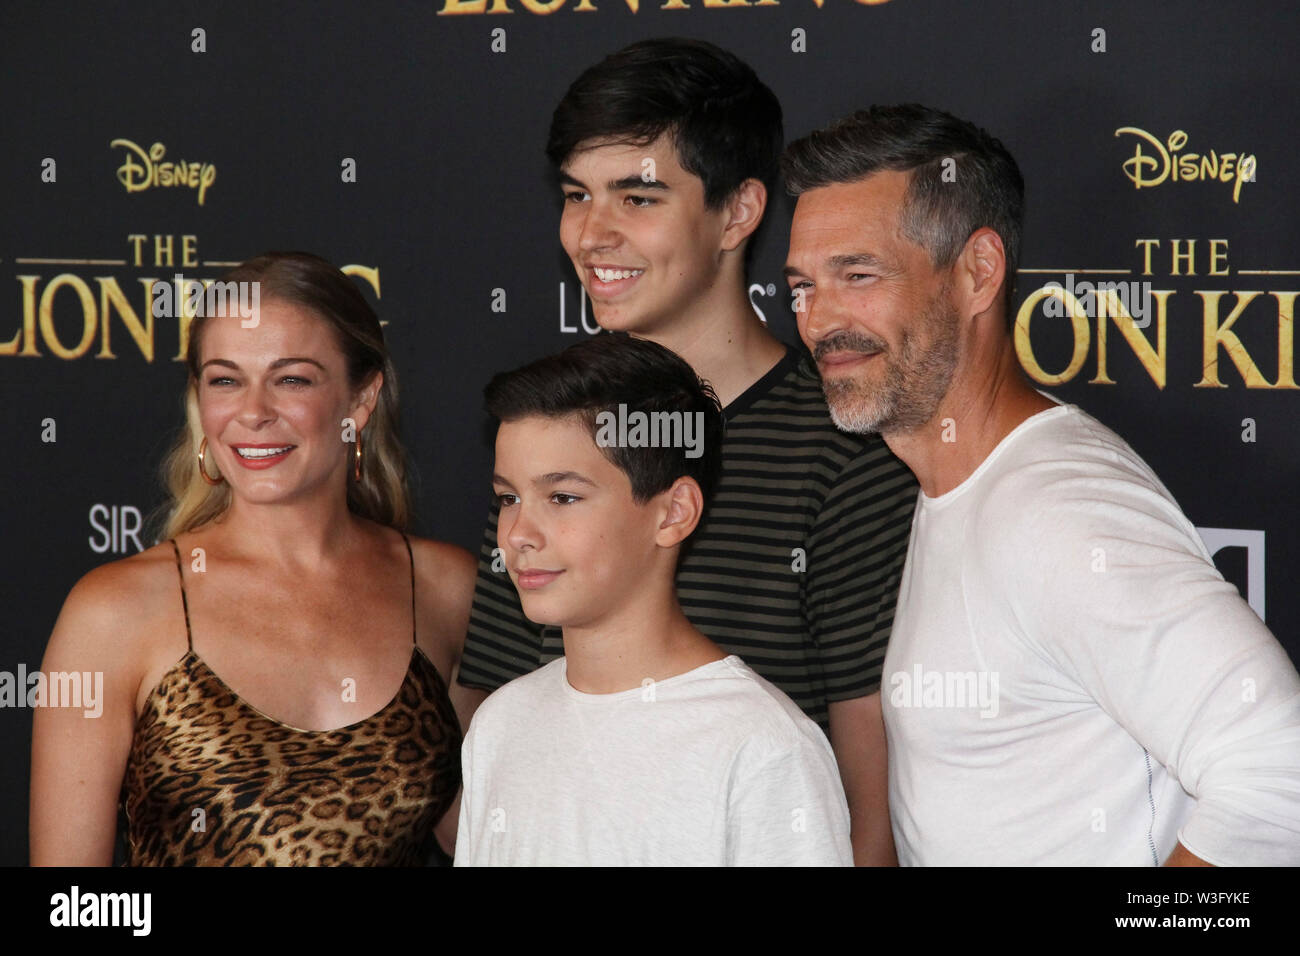 Eddie Cibrian, sons and LeAnn Rimes at World Premiere of Disney's 'The Lion King'. Held at the Dolby Theater in Hollywood, CA, July 9, 2019. Photo by: Richard Chavez / PictureLux Stock Photo